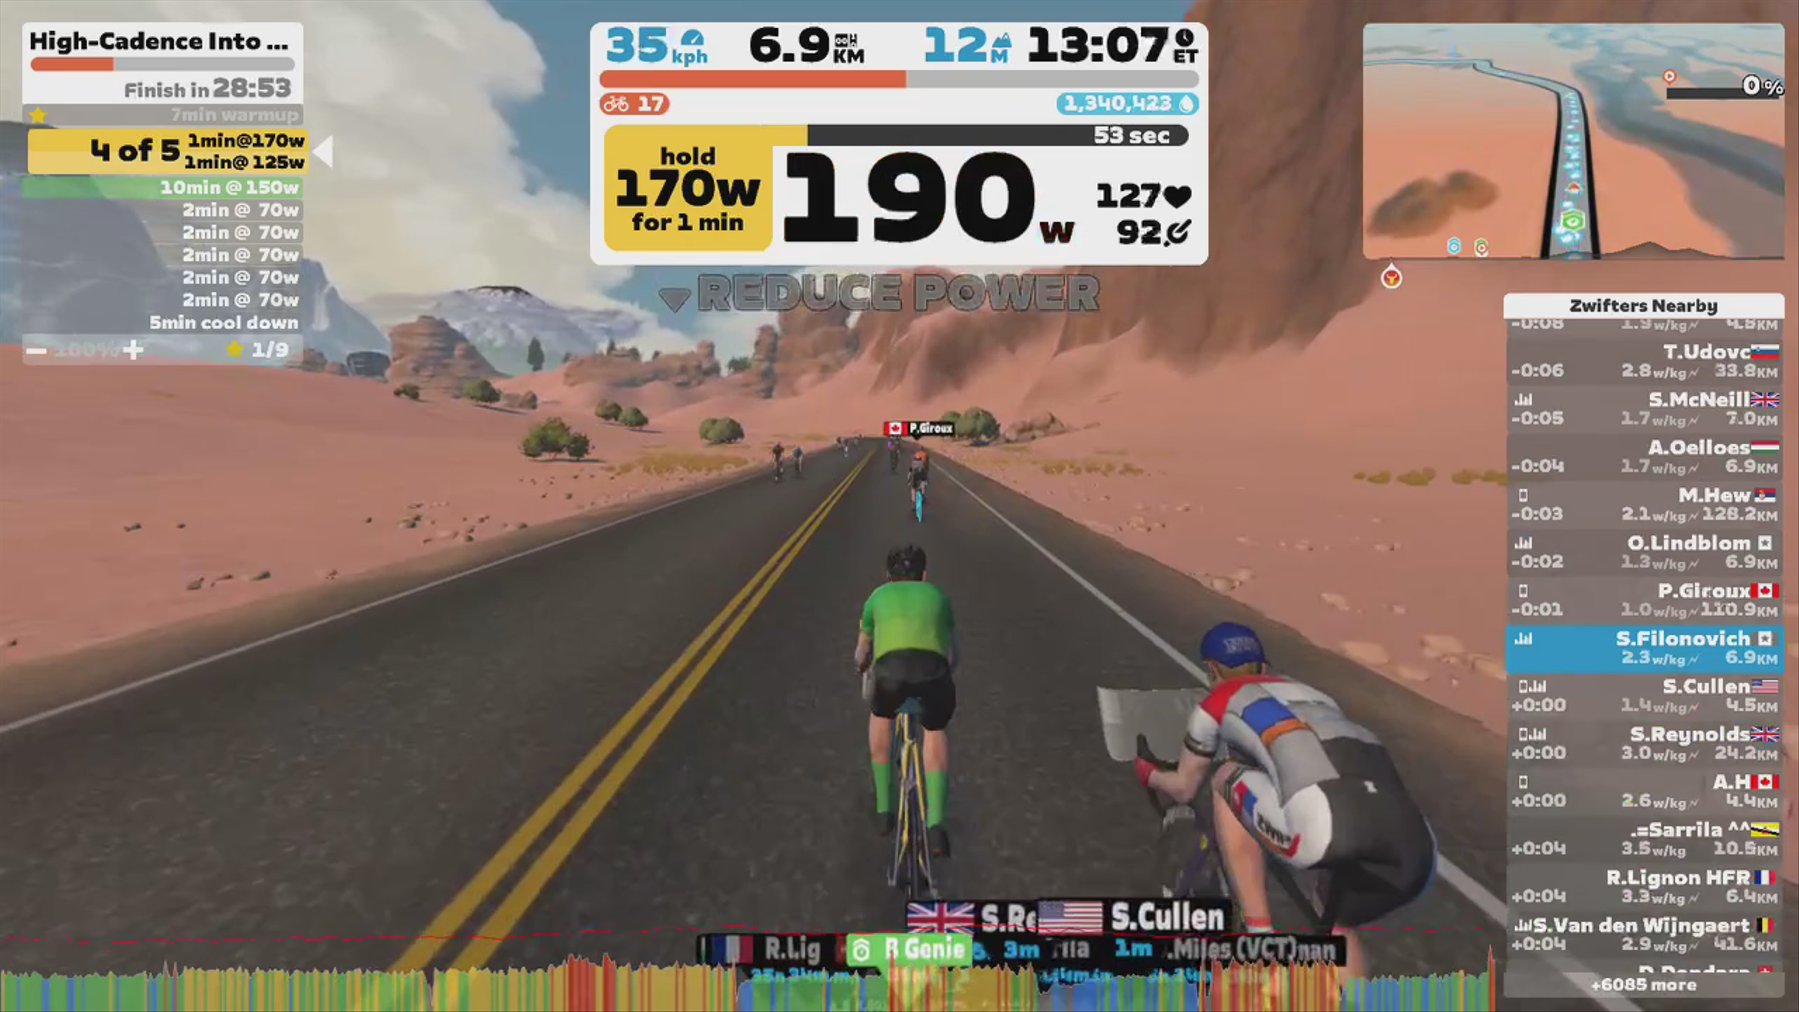 Zwift - High-Cadence Into Standing in Watopia